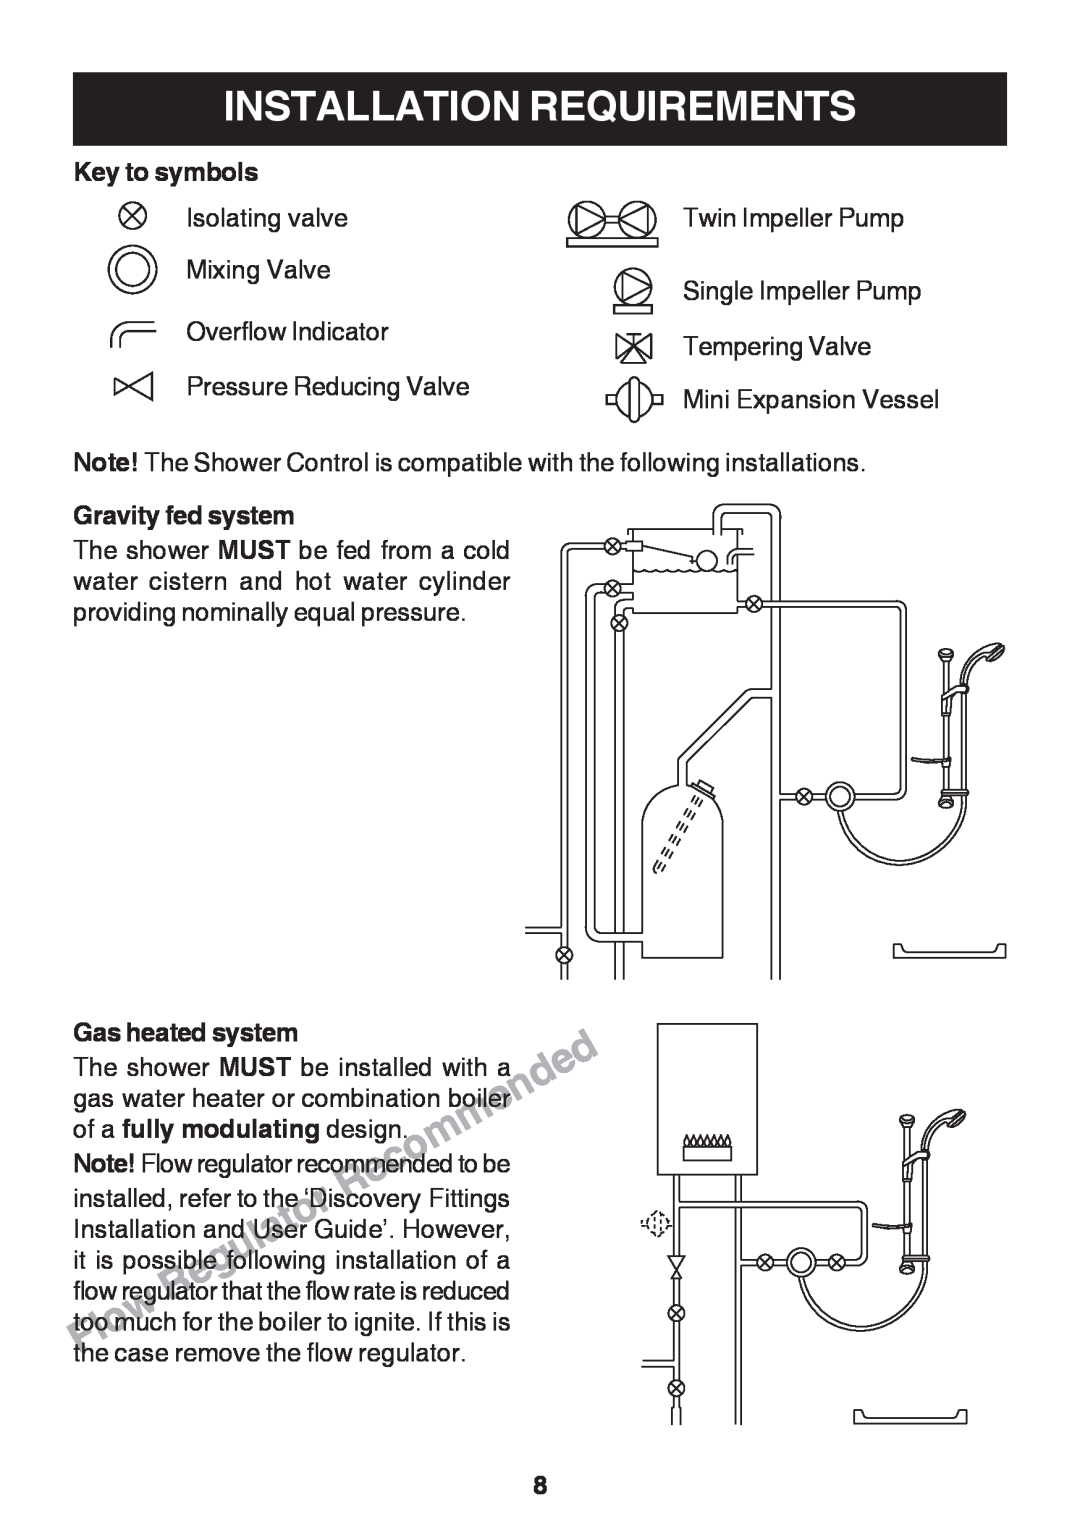 Kohler Discovery manual Installation Requirements, Key to symbols, Gravity fed system, Gas heated system 